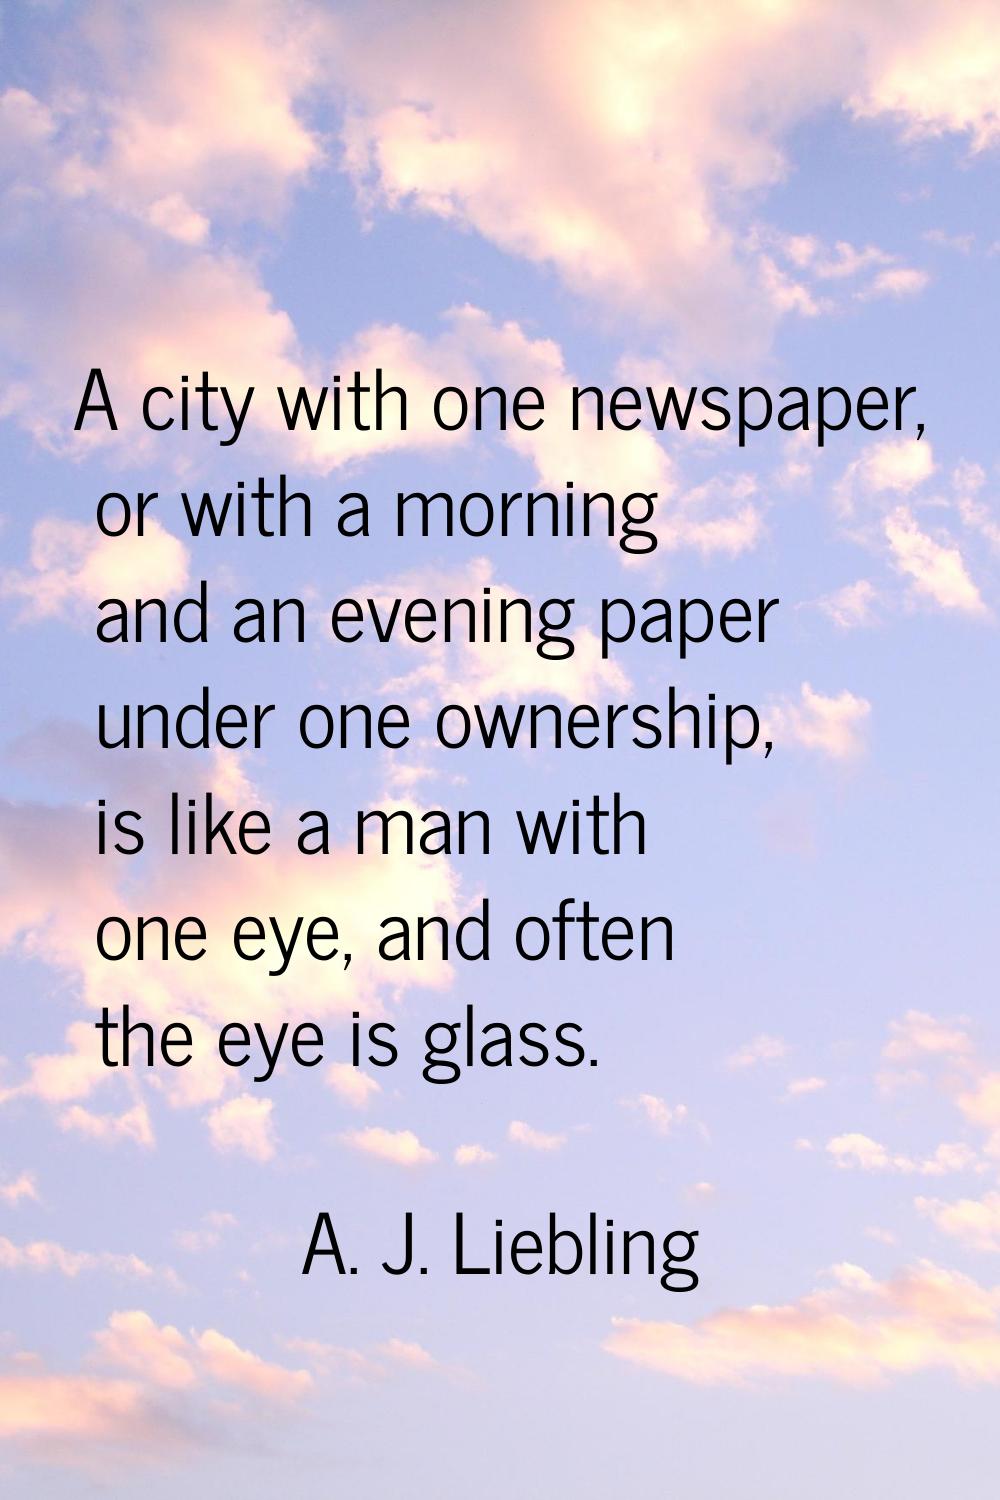 A city with one newspaper, or with a morning and an evening paper under one ownership, is like a ma